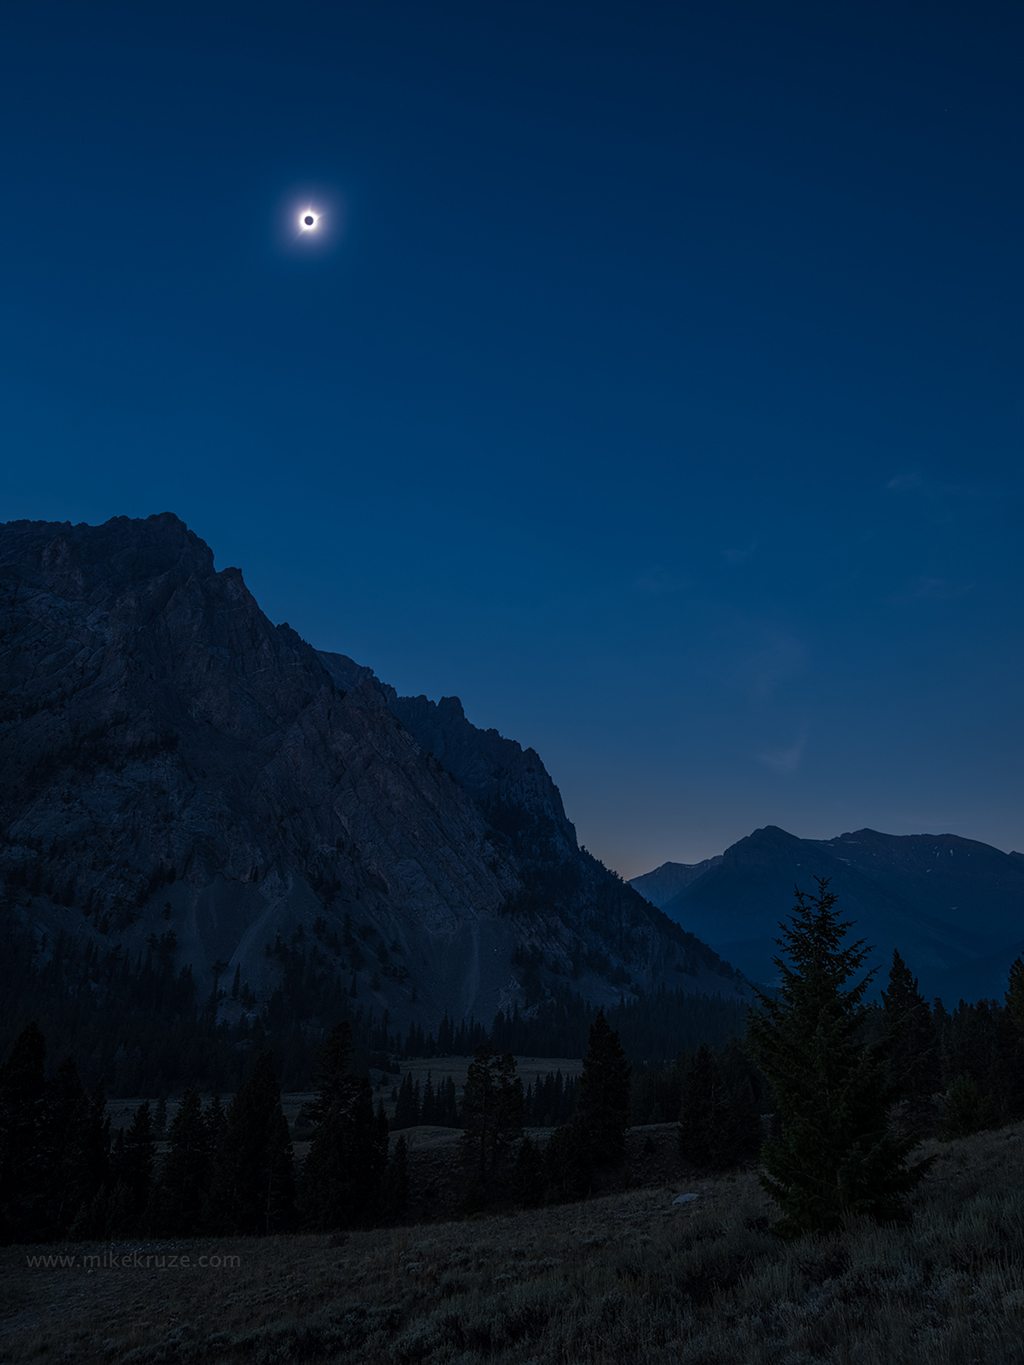 Today’s Photo Of The Day is “Solar Eclipse above the Lost River Range, central Idaho” by Mike Kruze. 